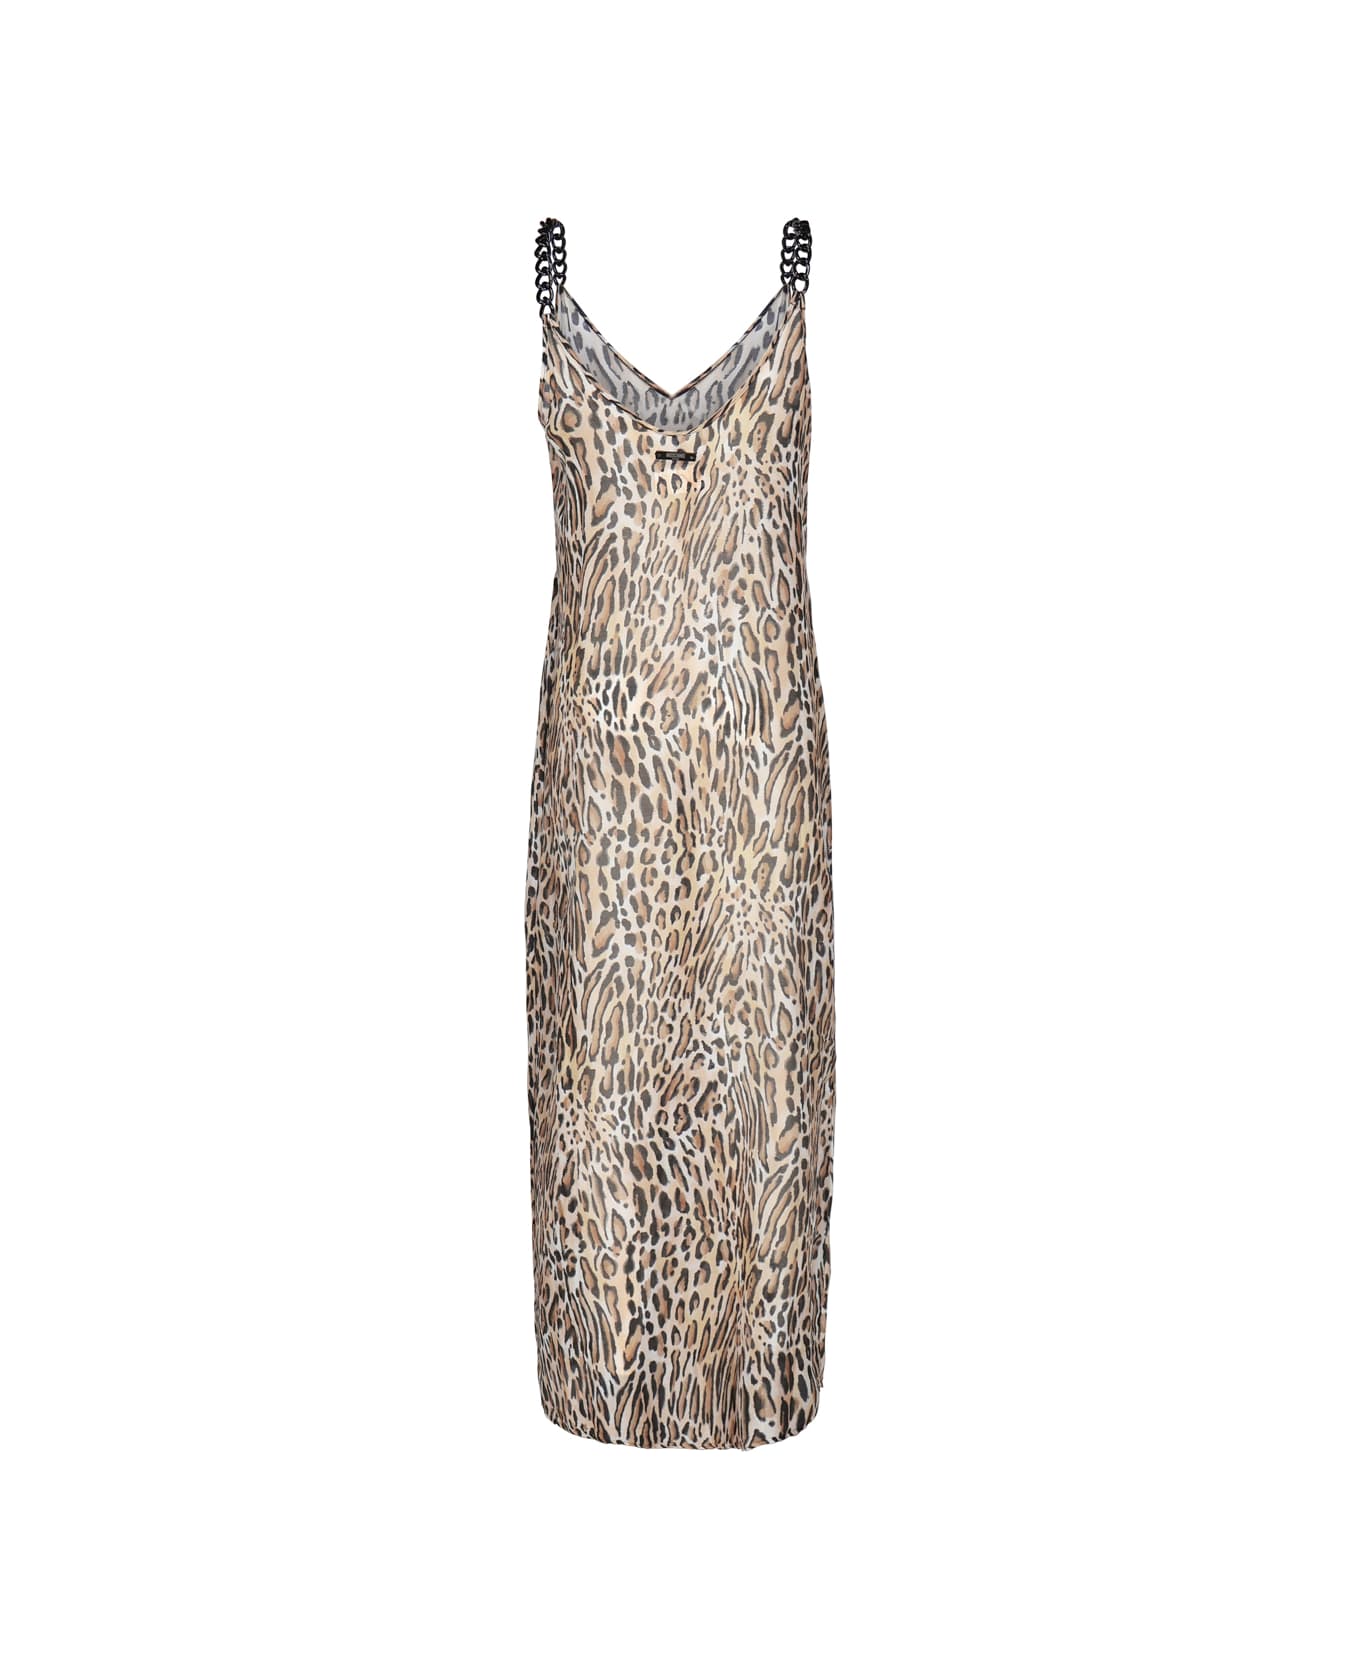 Moschino Leopard Print Silk Blend Dress - Fantasy print only one colour ワンピース＆ドレス